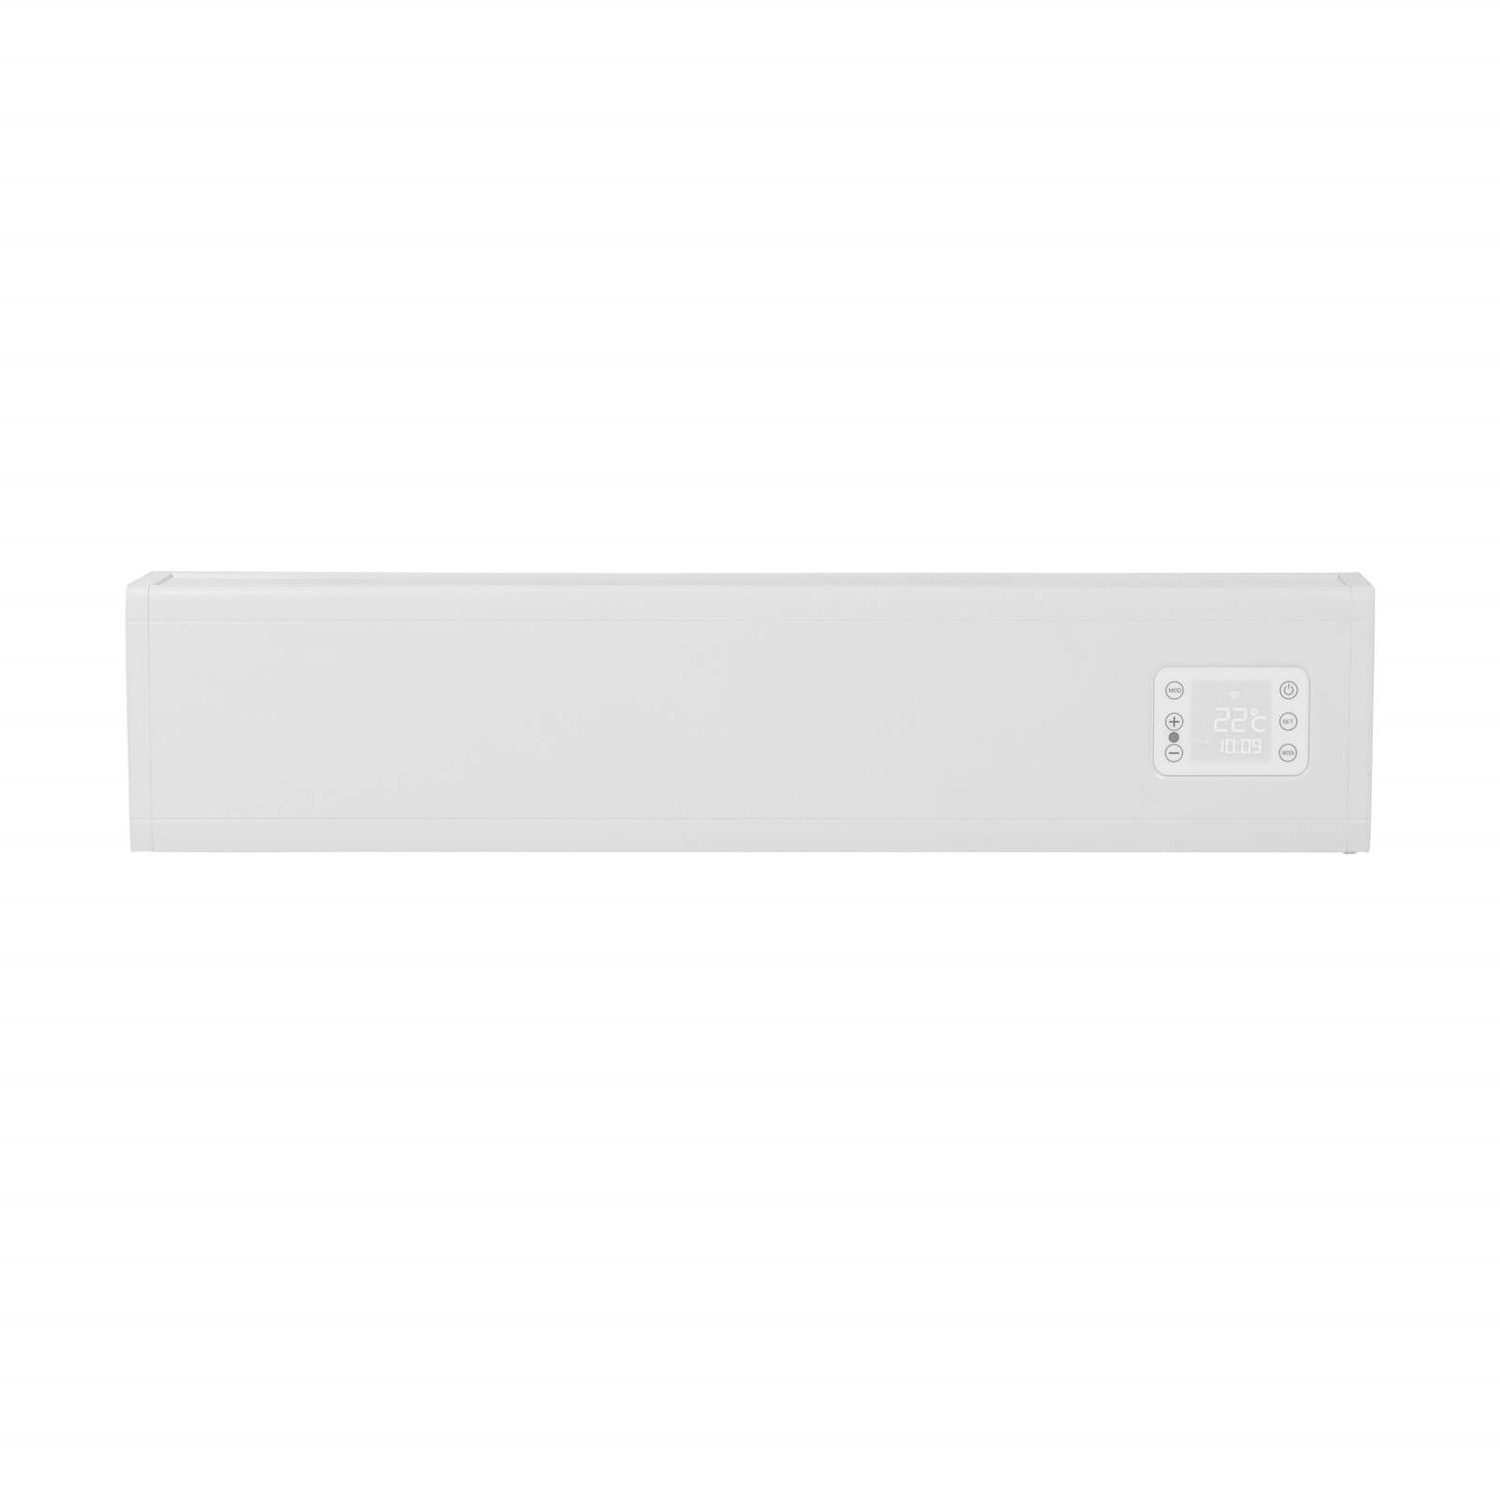 Convector Verwarming Eurom Alutherm Baseboard 1500W Laag Model met Wi-Fi Wit Eurom